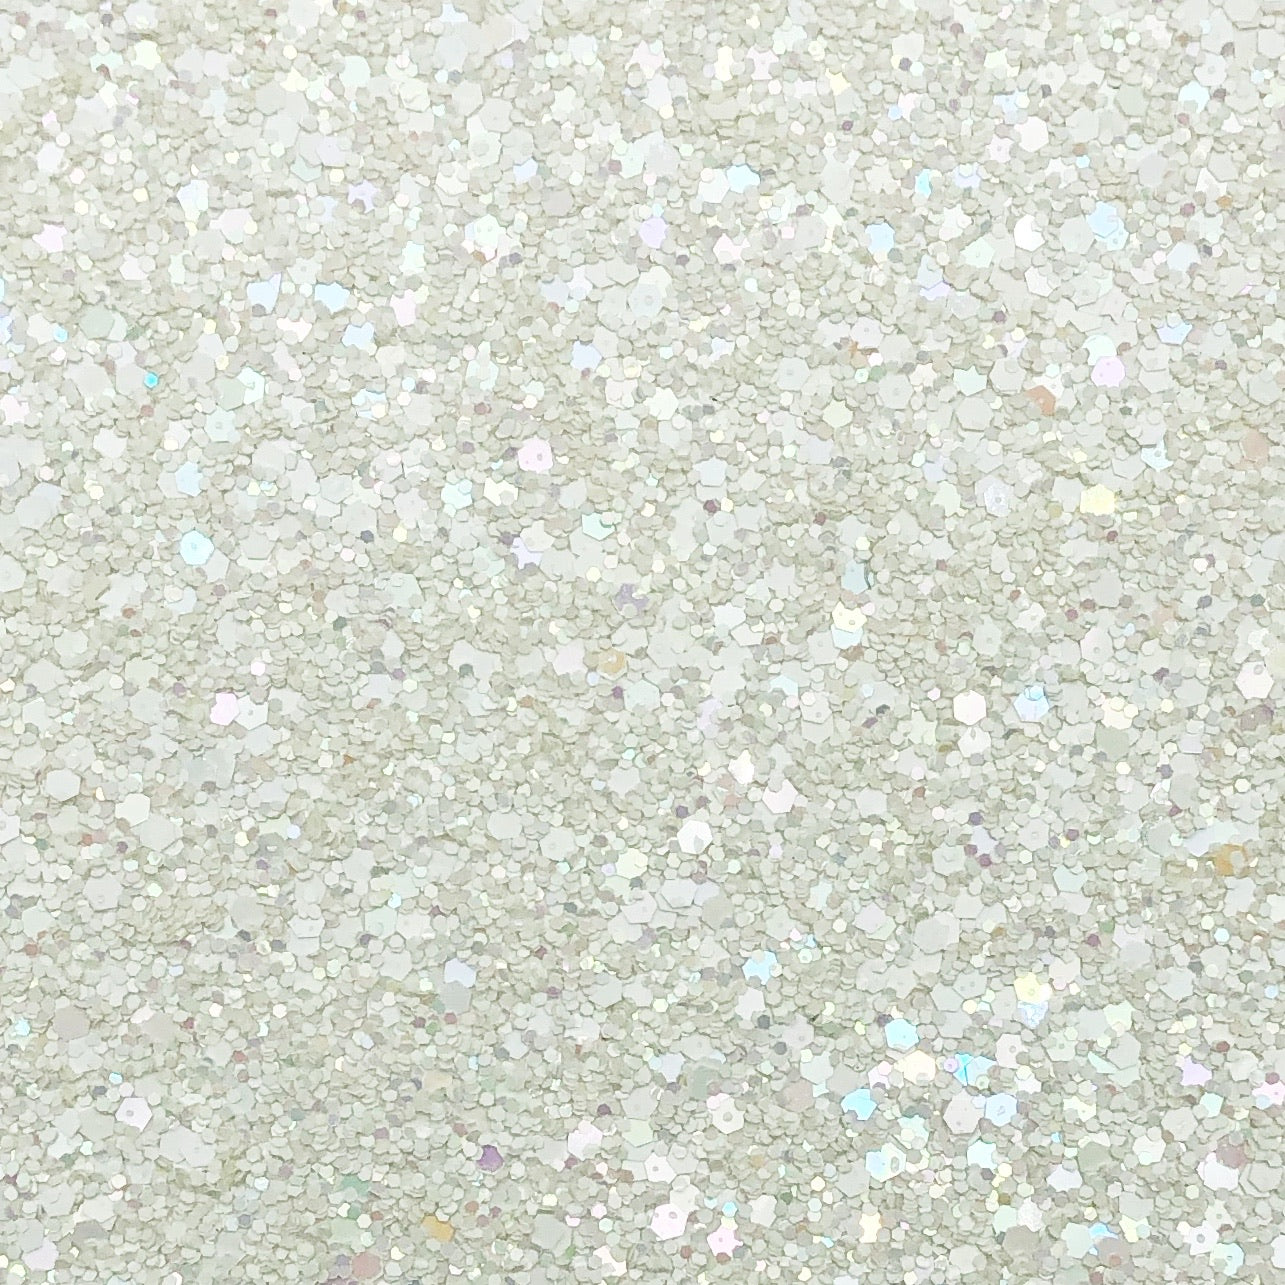 Chunky Glitter (limited stock available) — Circle Visual Inc.